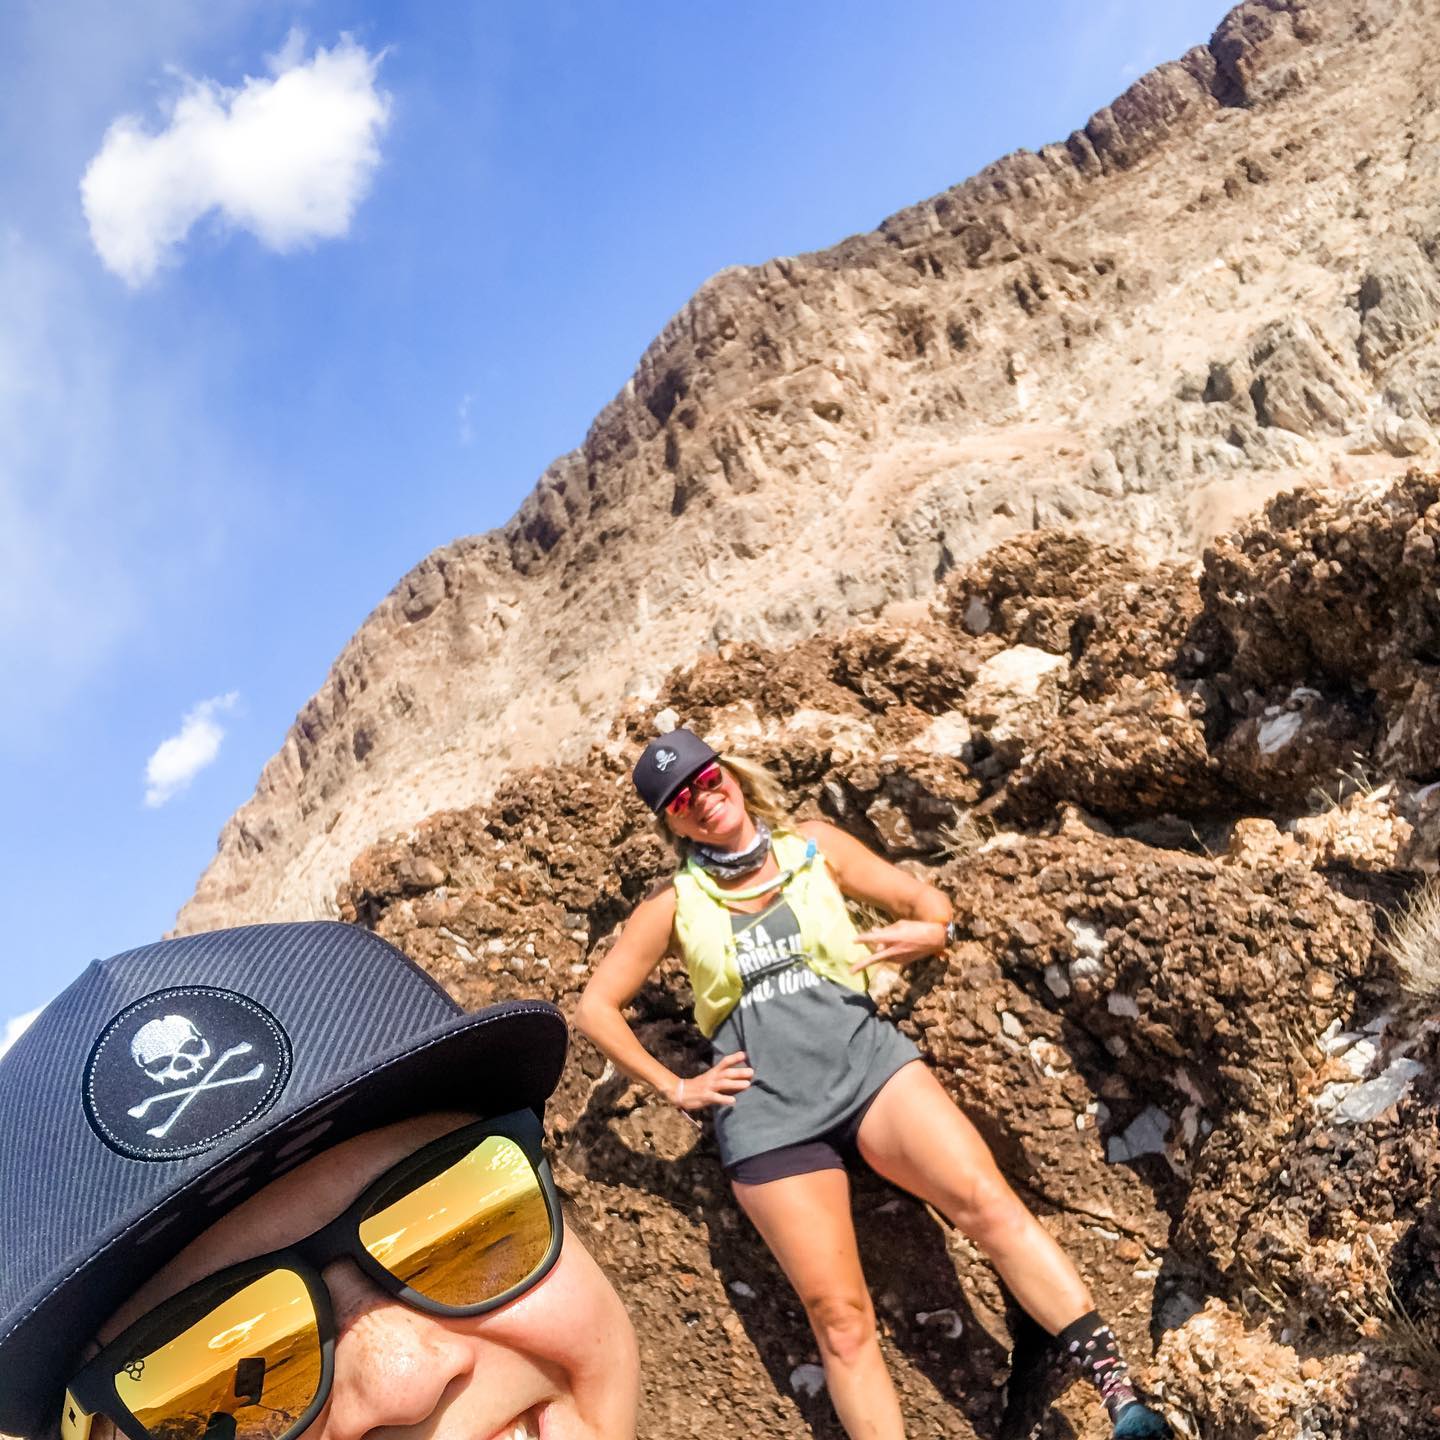 Is it really a long run if you don’t take selfies? What if you take some selfies and a freaky panoramic? 🤣 Fun on the trails with @wining__runner — SWIPE TO THE LAST FEW PHOTOS #baseperformance #teamultra #michelobultra #beyondvegas#flofactoryteam #hshive #teamrivs #nottoday [instagram]